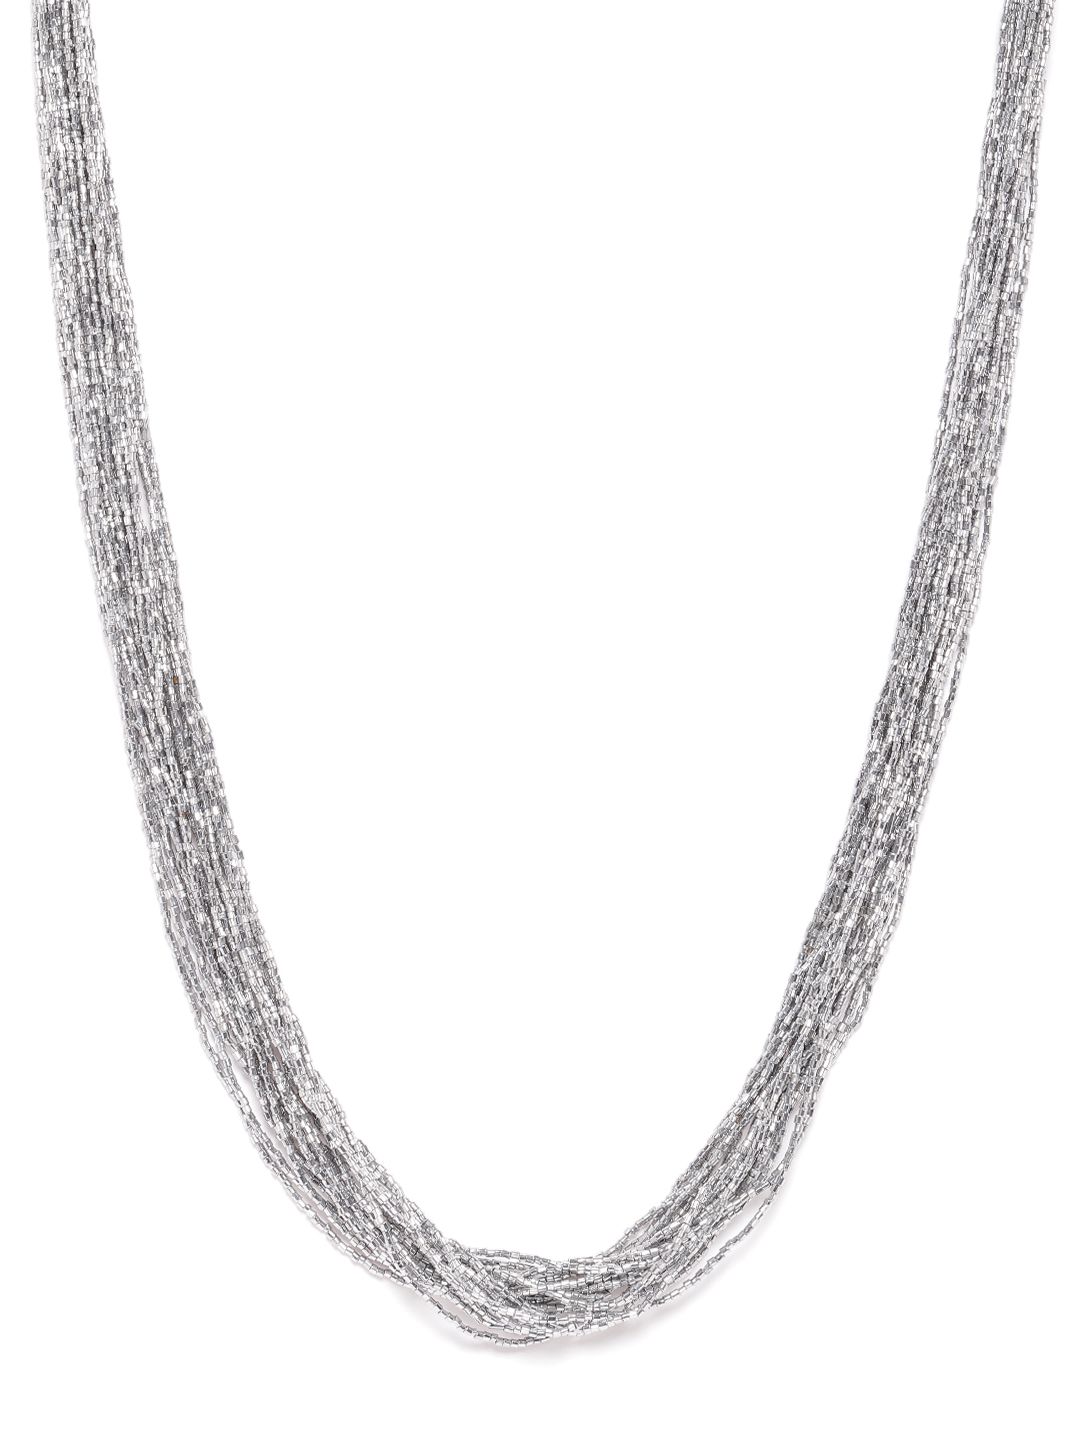 RICHEERA Women Silver-Toned Artificial Beaded Multi-Stranded Necklace Price in India